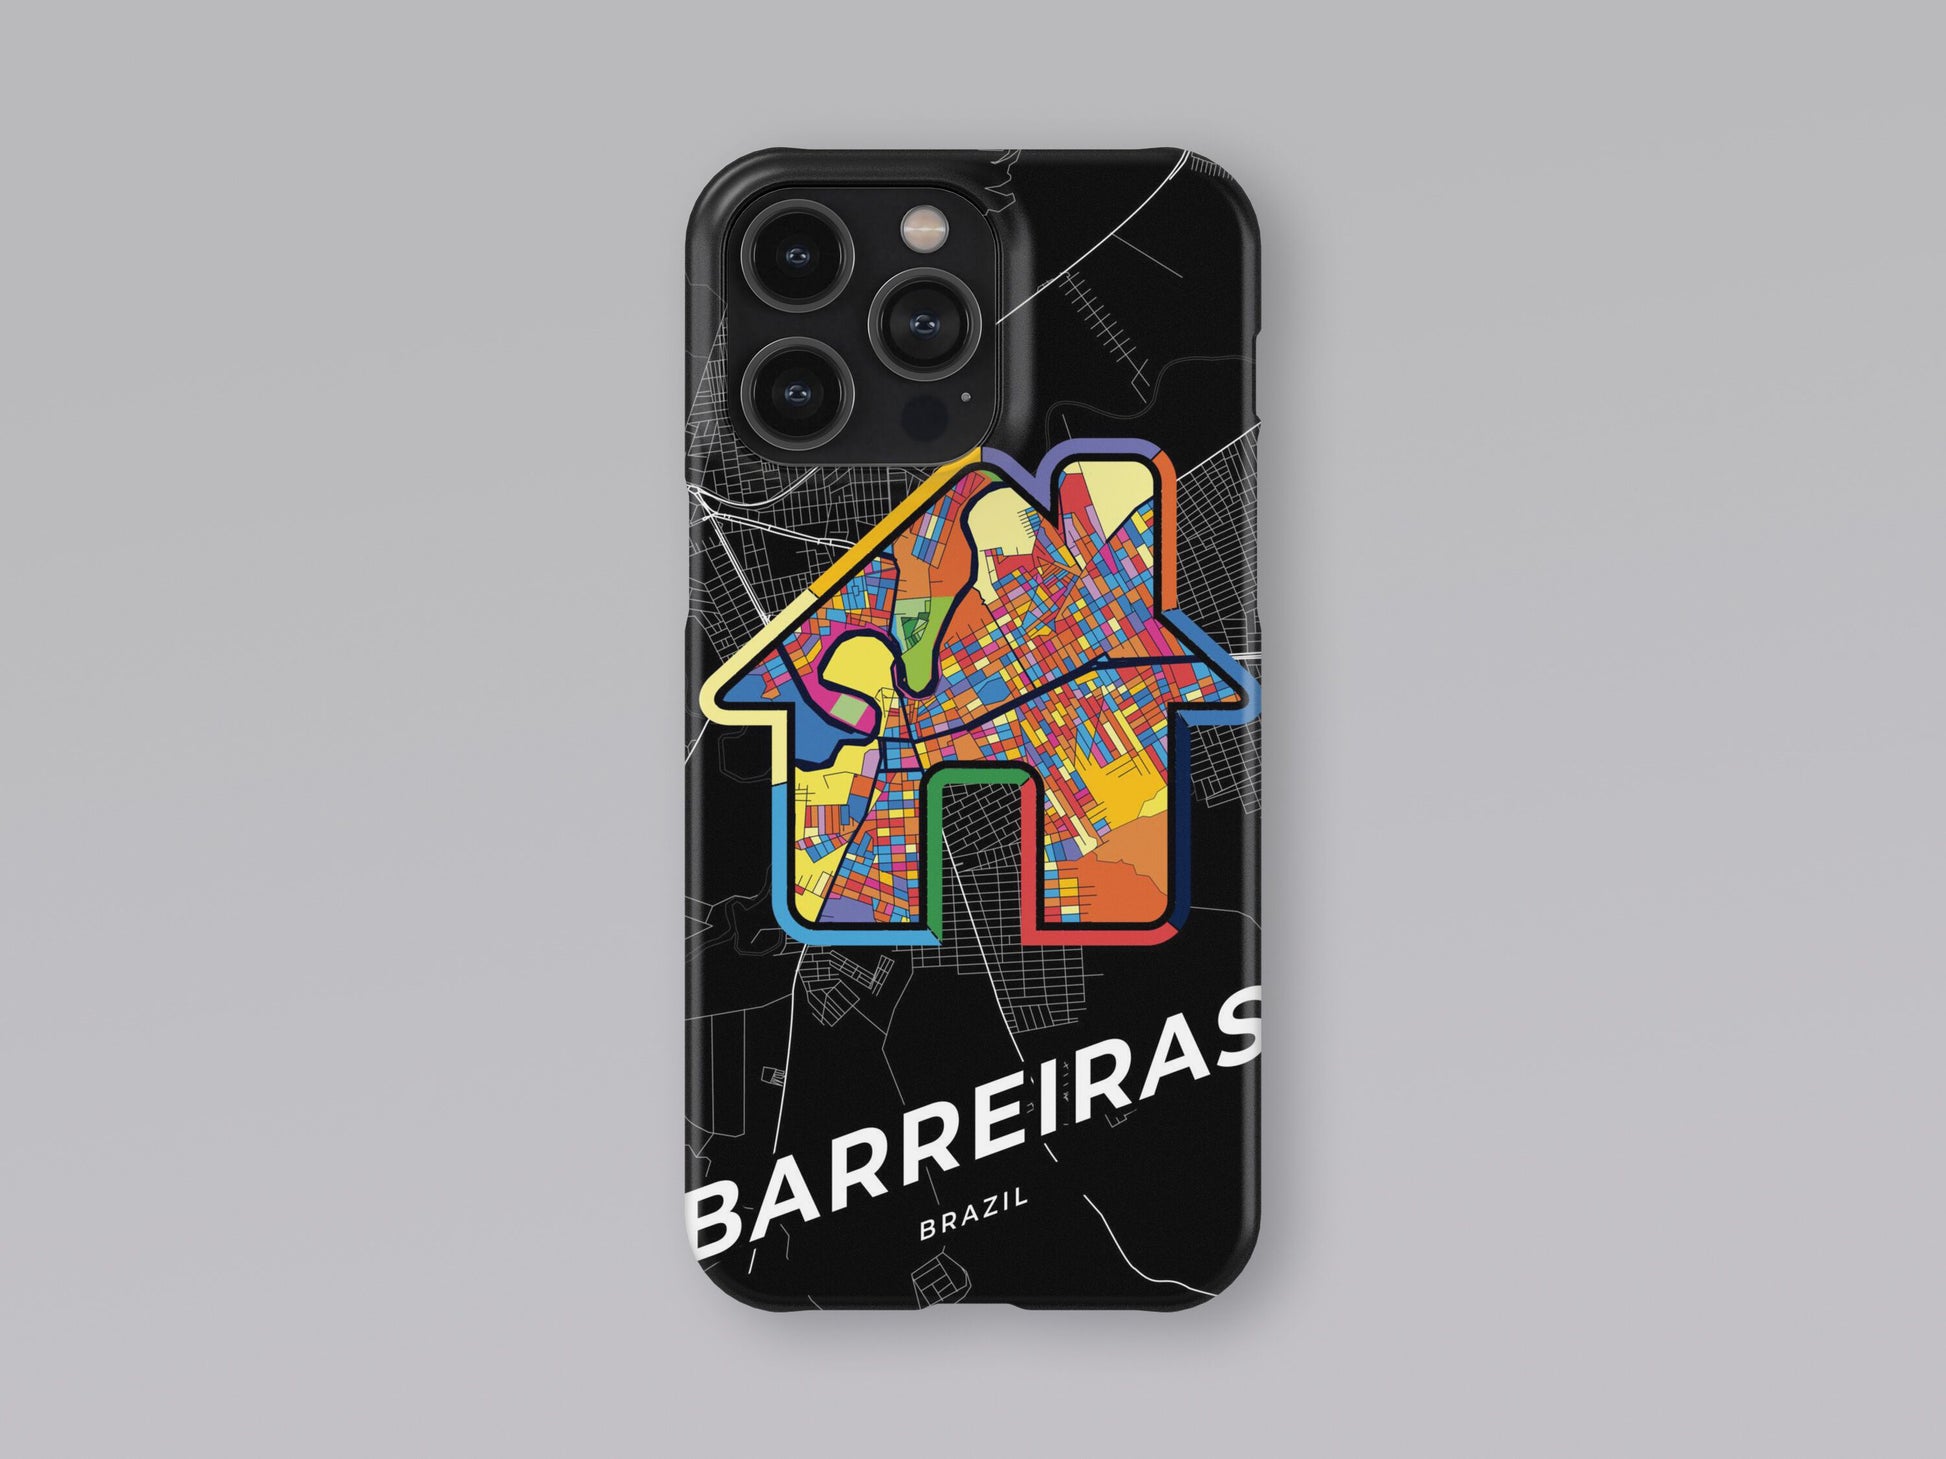 Barreiras Brazil slim phone case with colorful icon. Birthday, wedding or housewarming gift. Couple match cases. 3